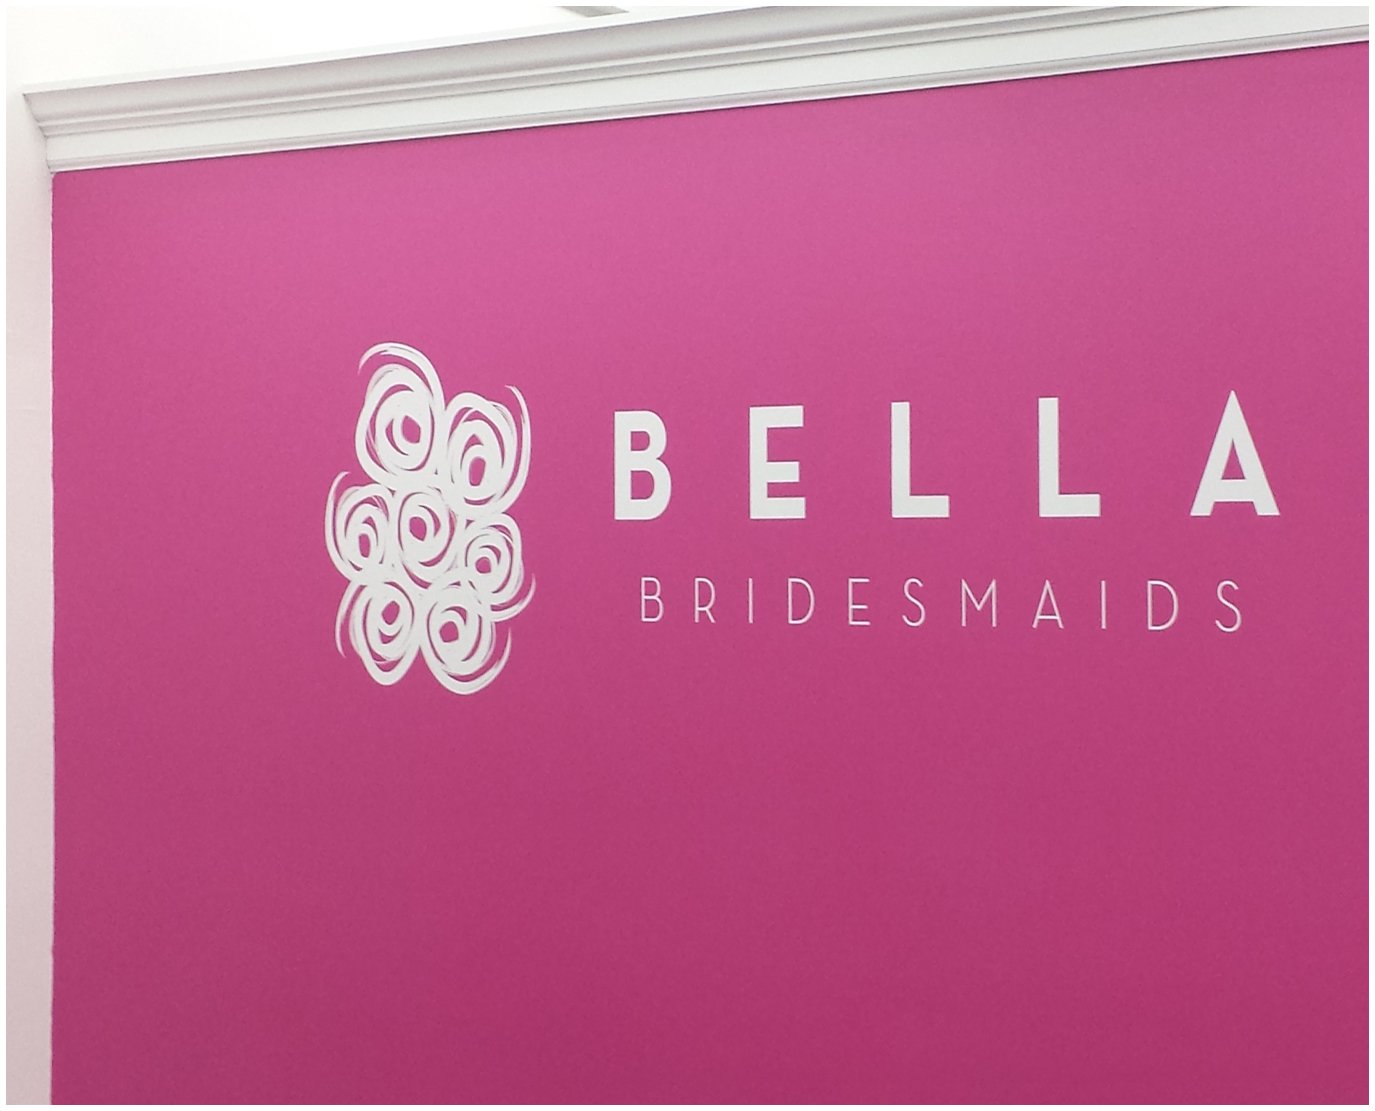 wall decal for bella brides maids